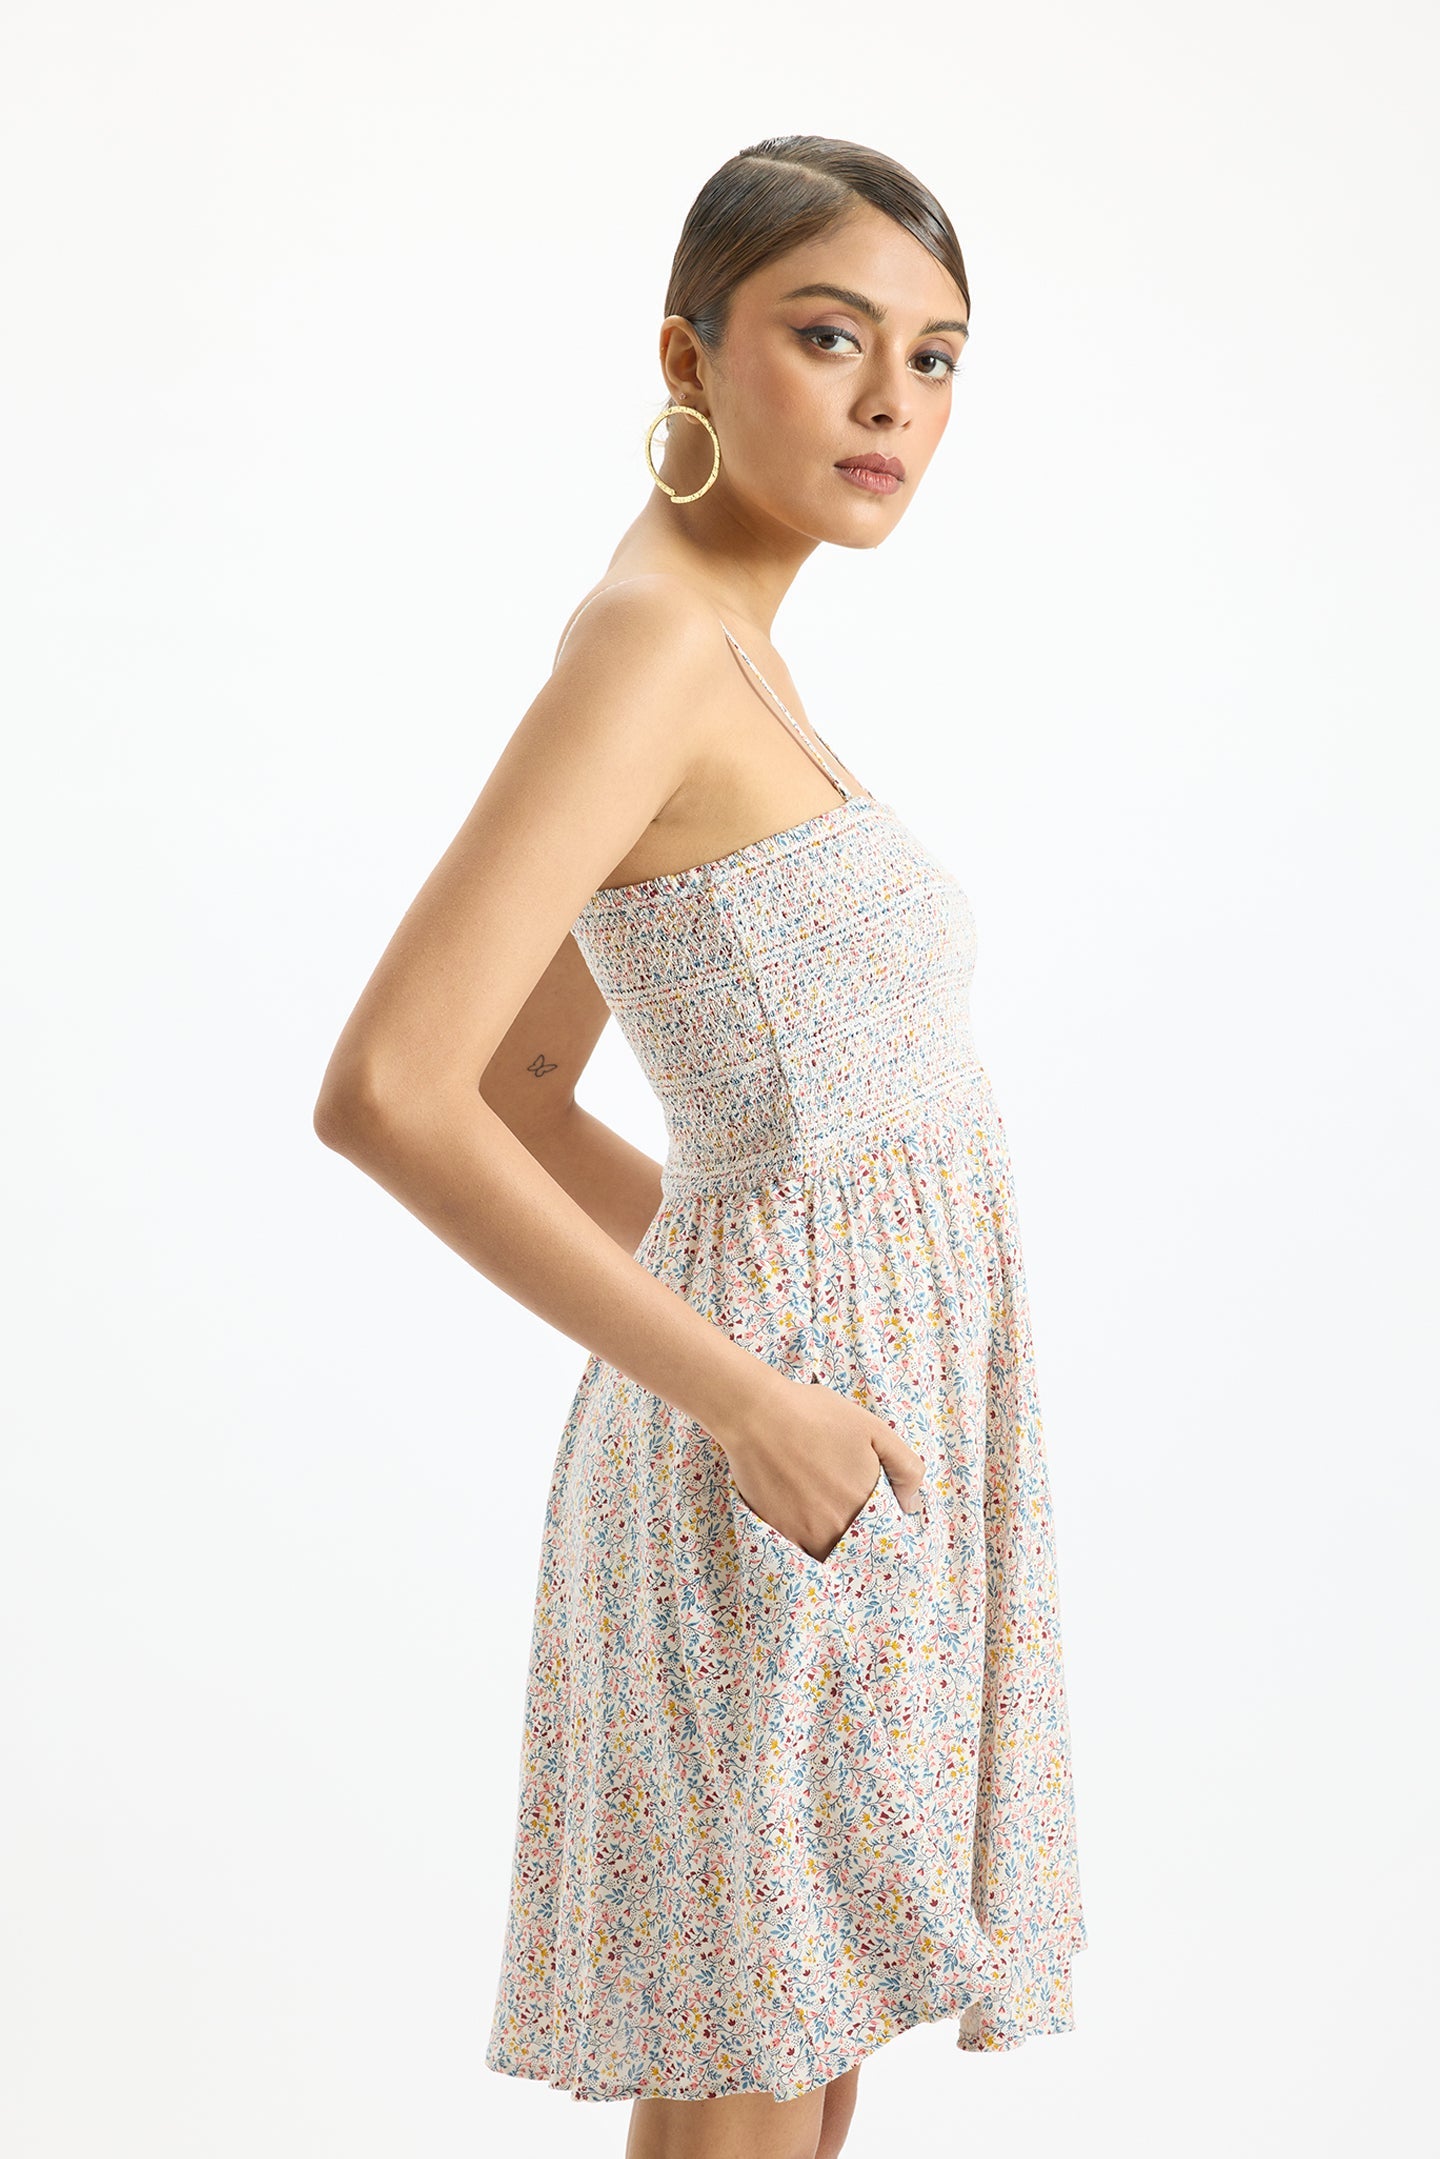 Arwa|Multicolored Meadow Smocked Floral Dress